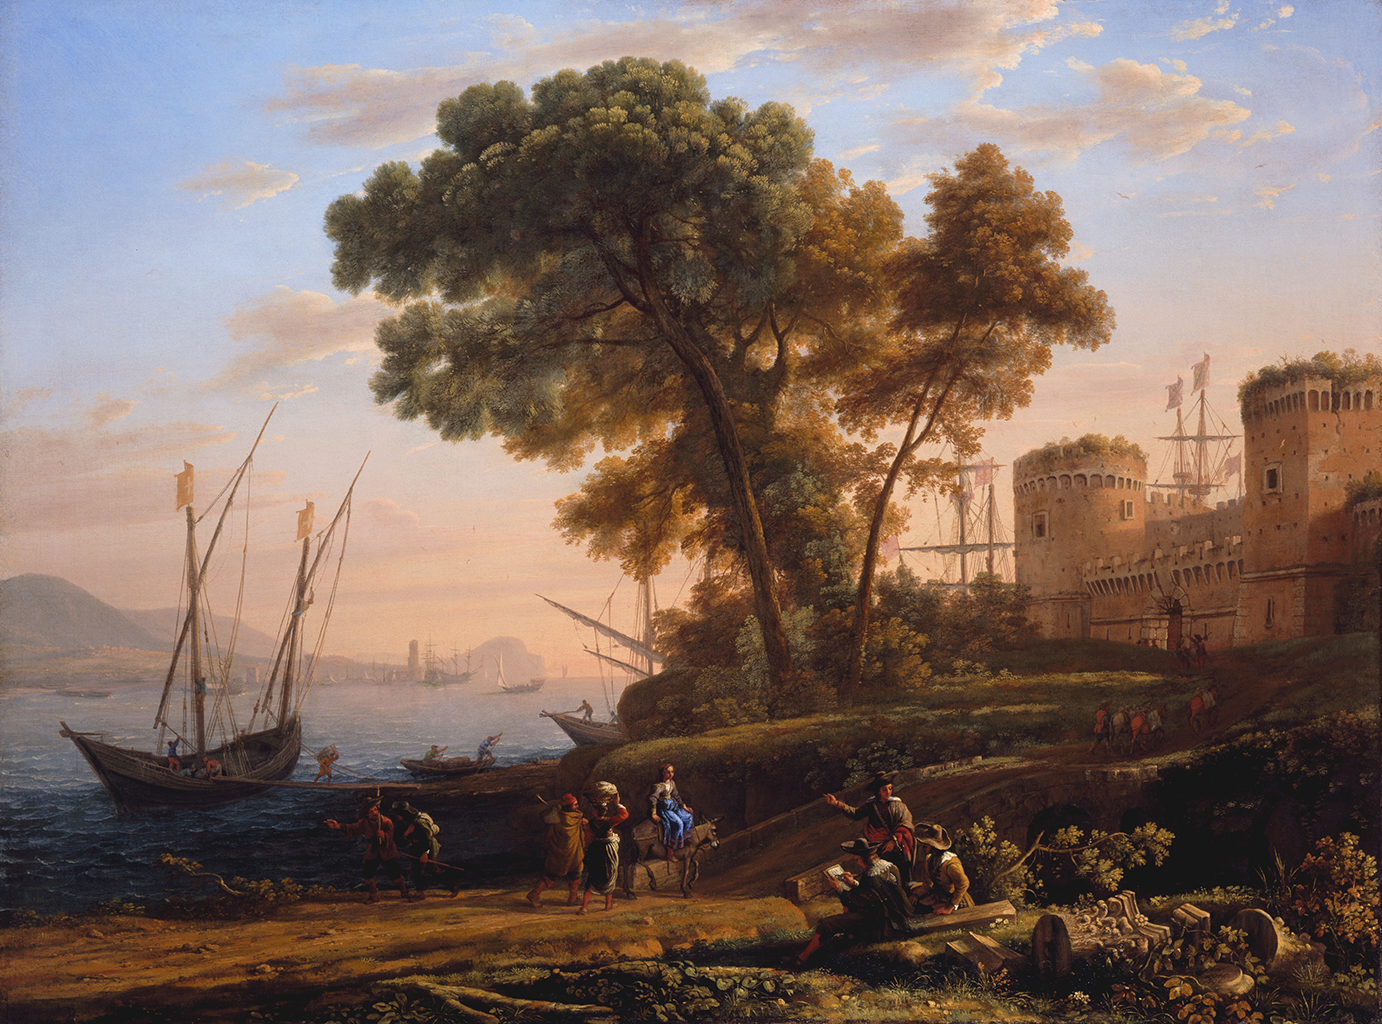 A landscape painting of, from left to right, a seaport with blue waters and a docked wooden ship; a gently sloping hill with a large green tree in the center; and a tan, towered fortress. Before this vista is a dirt path populated with travelers. One traveler at the very center is a woman in a bright blue dress riding a donkey. An artist and two other men are seated facing the path and sketching the scene.